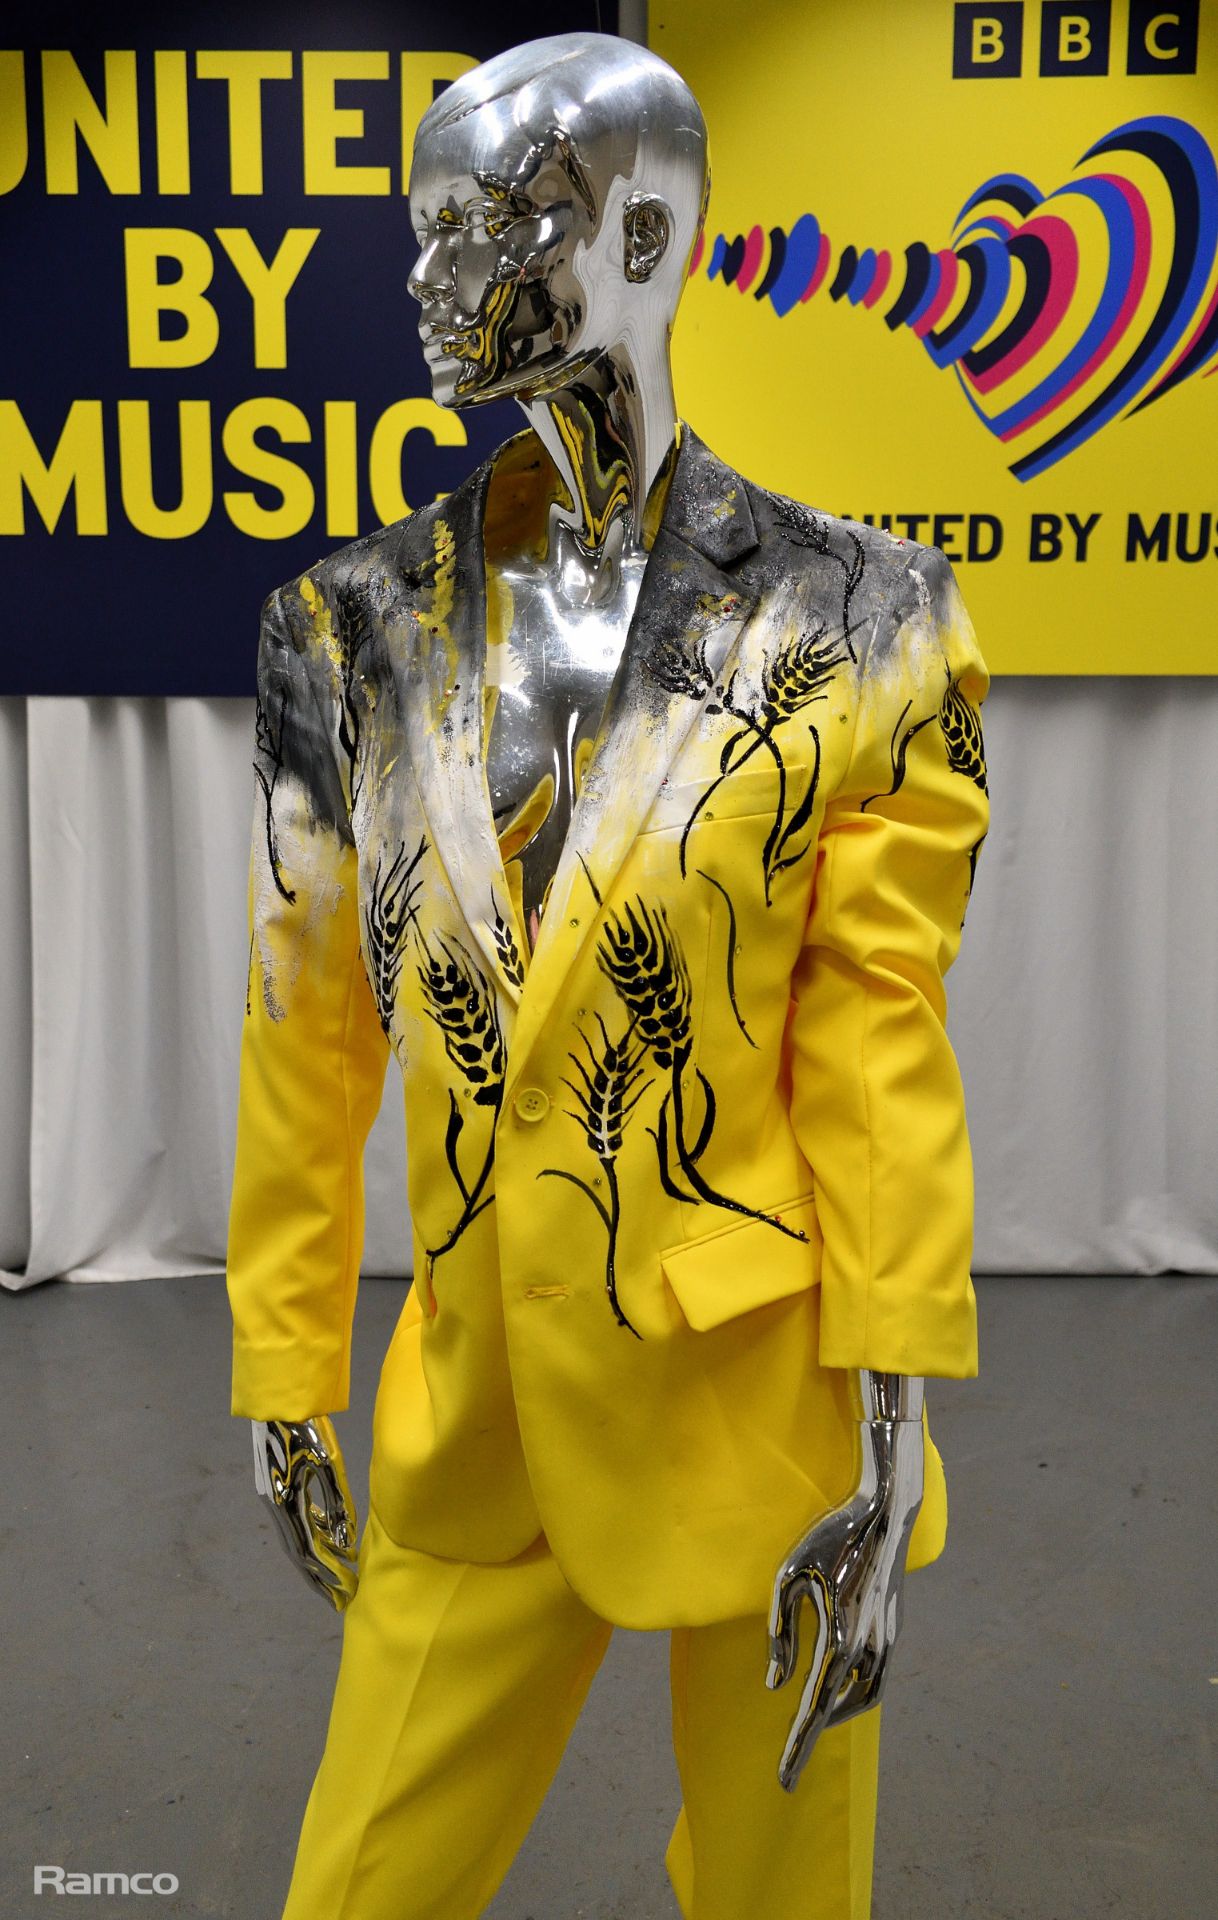 Yellow Outfits worn by backing dancers during the United by Music performance by Mariya Yaremchuck - Image 2 of 15